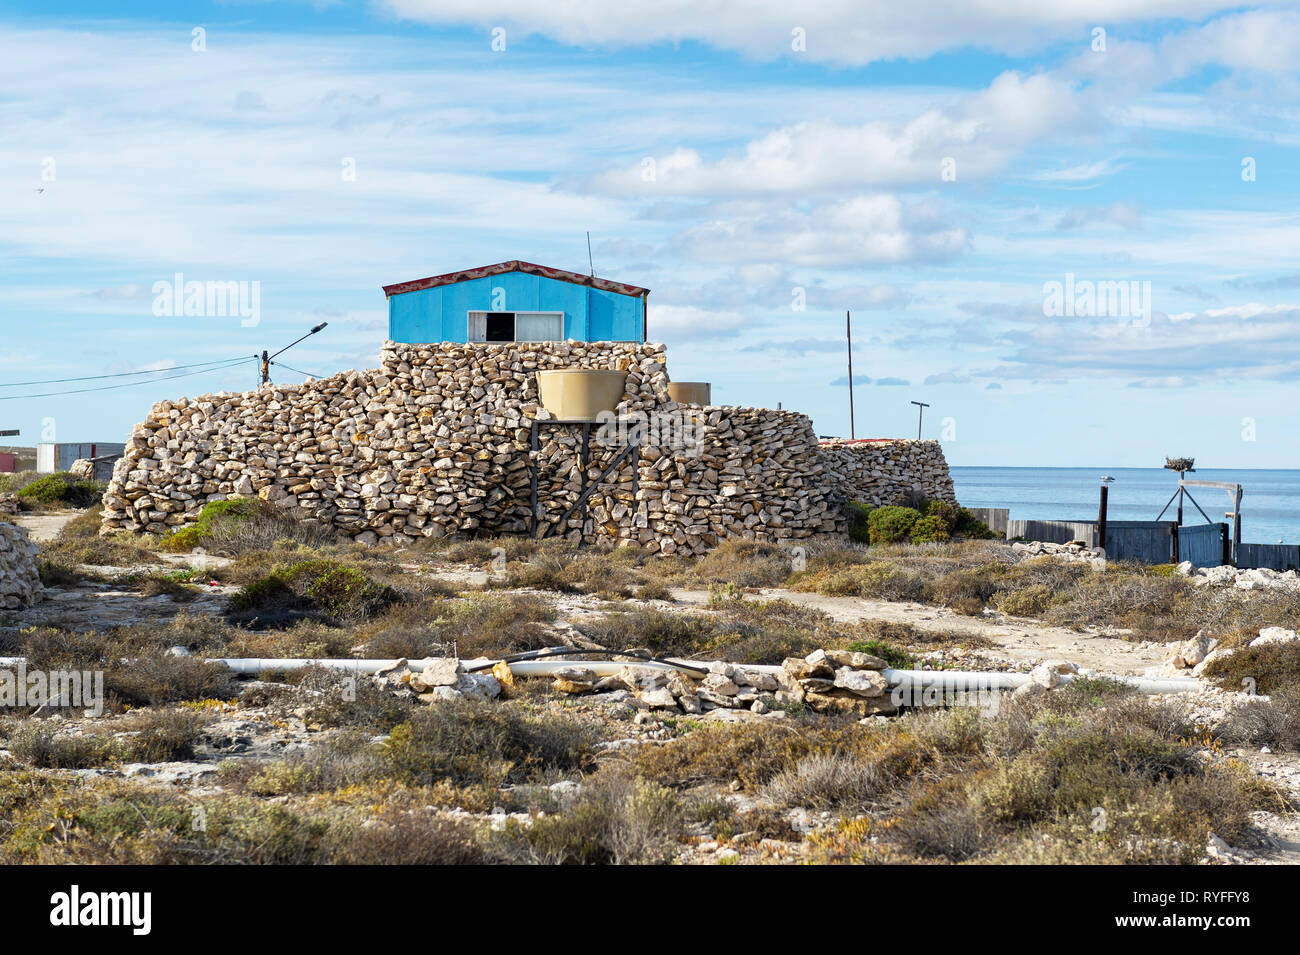 Pigeon Island in the Wallabi Group.  The Houtman Abrolhos islands lie 60 kilometres off the coast of Geraldton in Western Australia. There are 122 pri Stock Photo